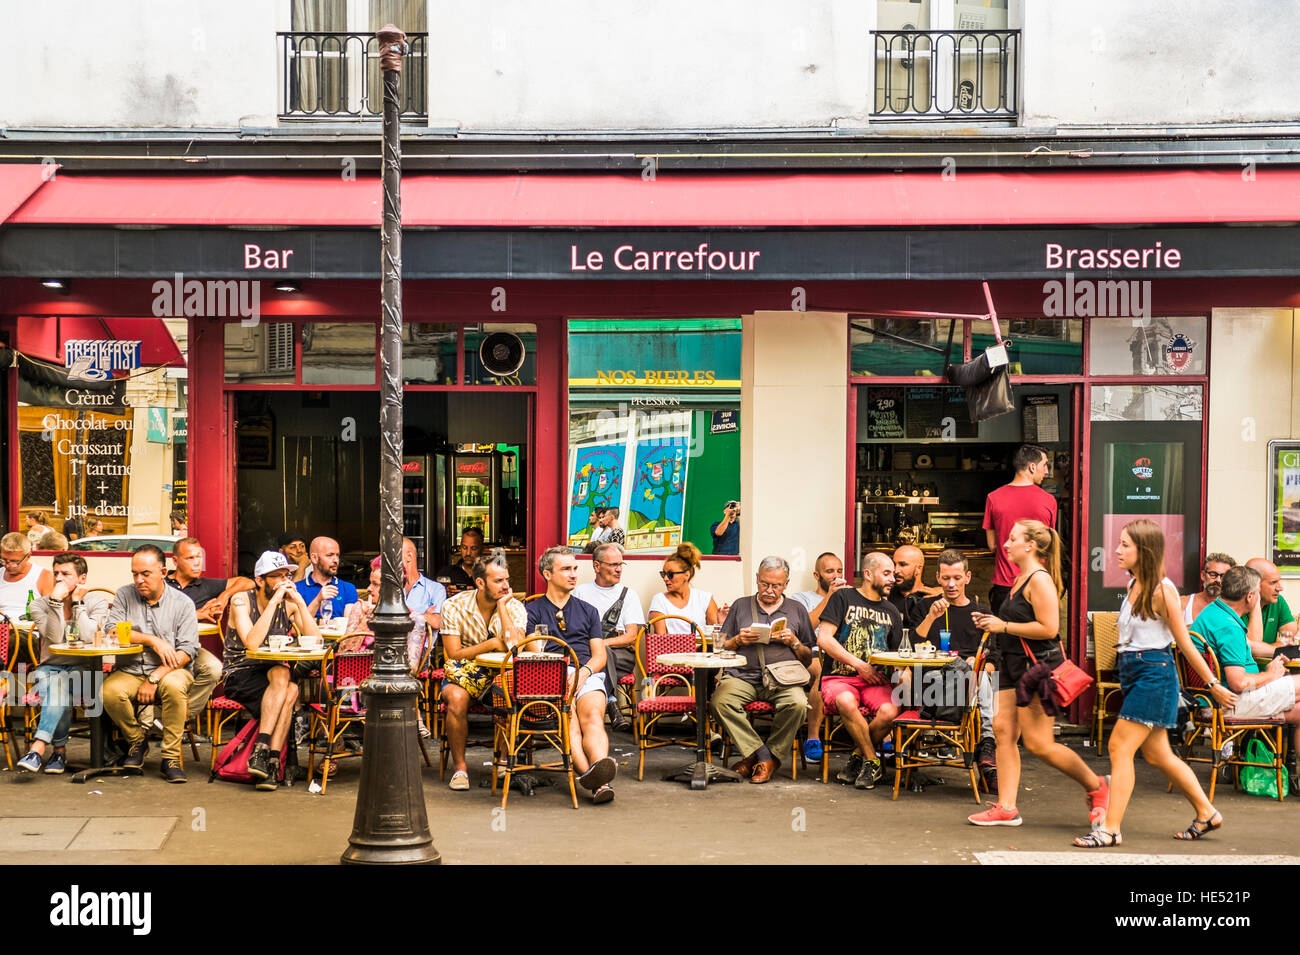 street scene in front of le carrefour, bar, brasserie Stock Photo